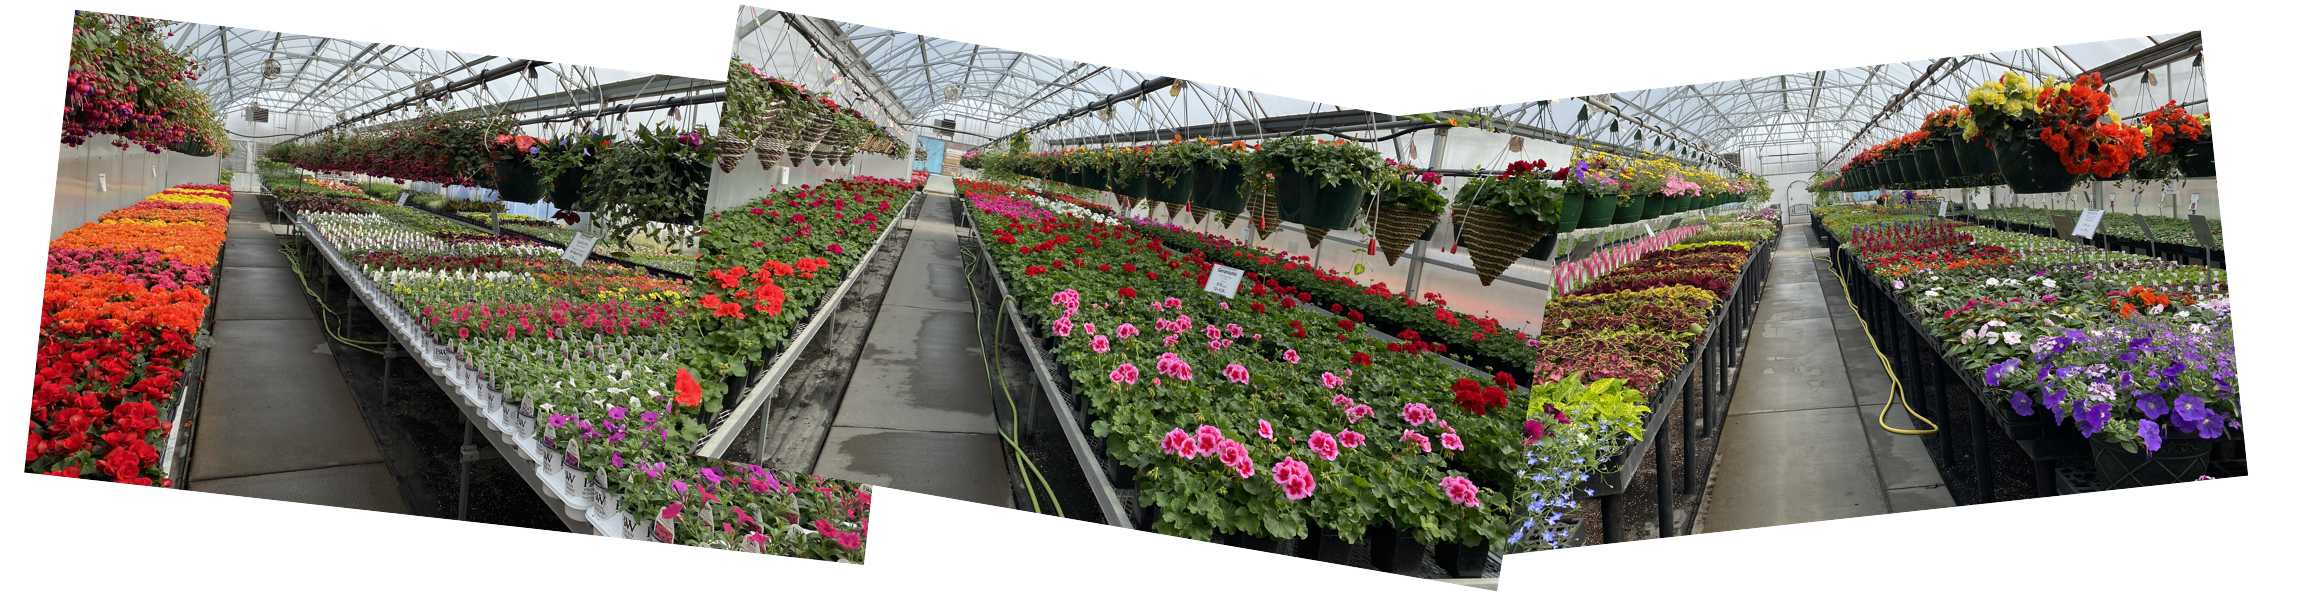 images of greenhouses